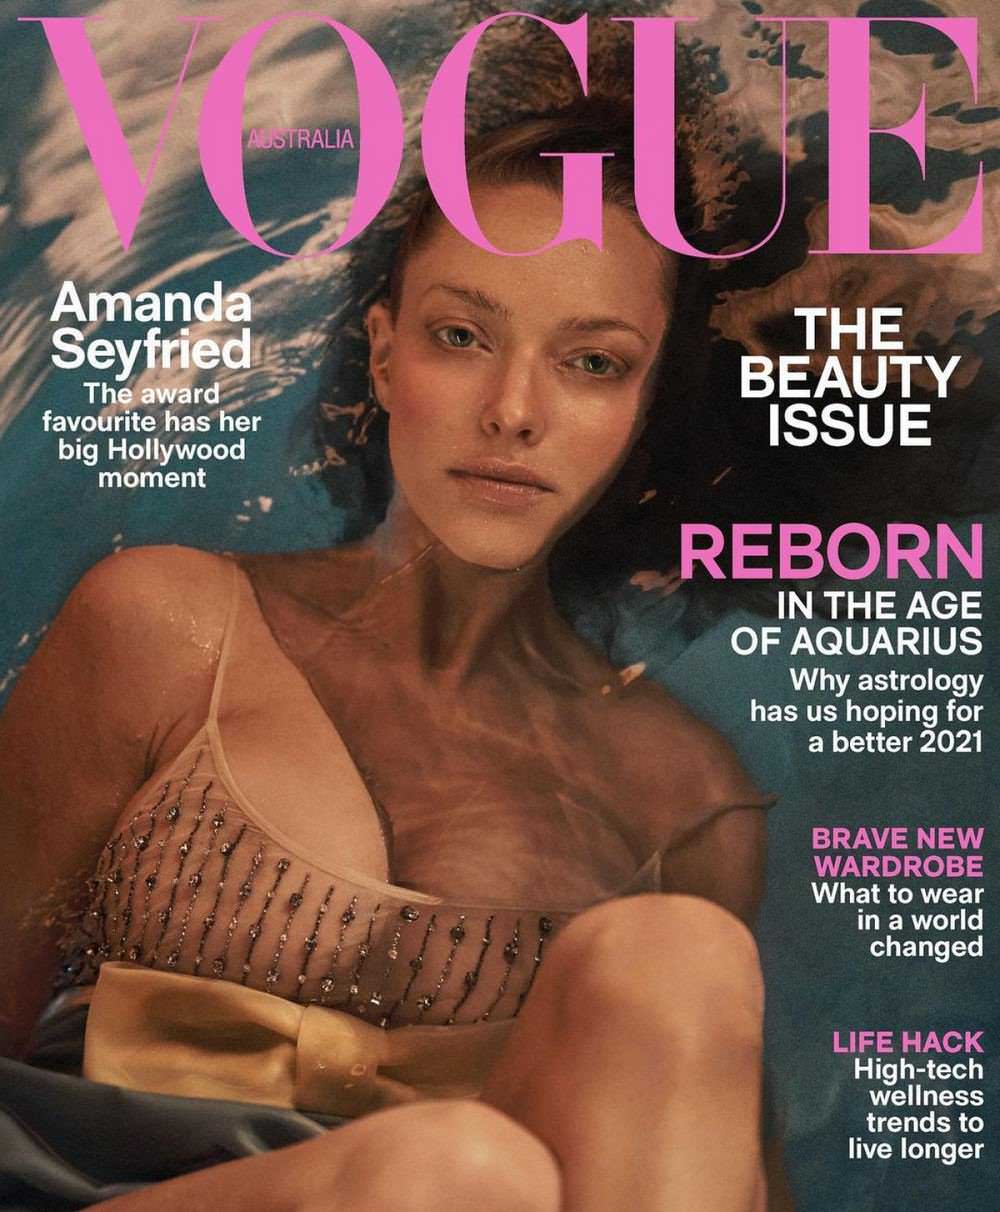 Amanda Seyfried on the Cover of Vogue Australia February 2021 Issue